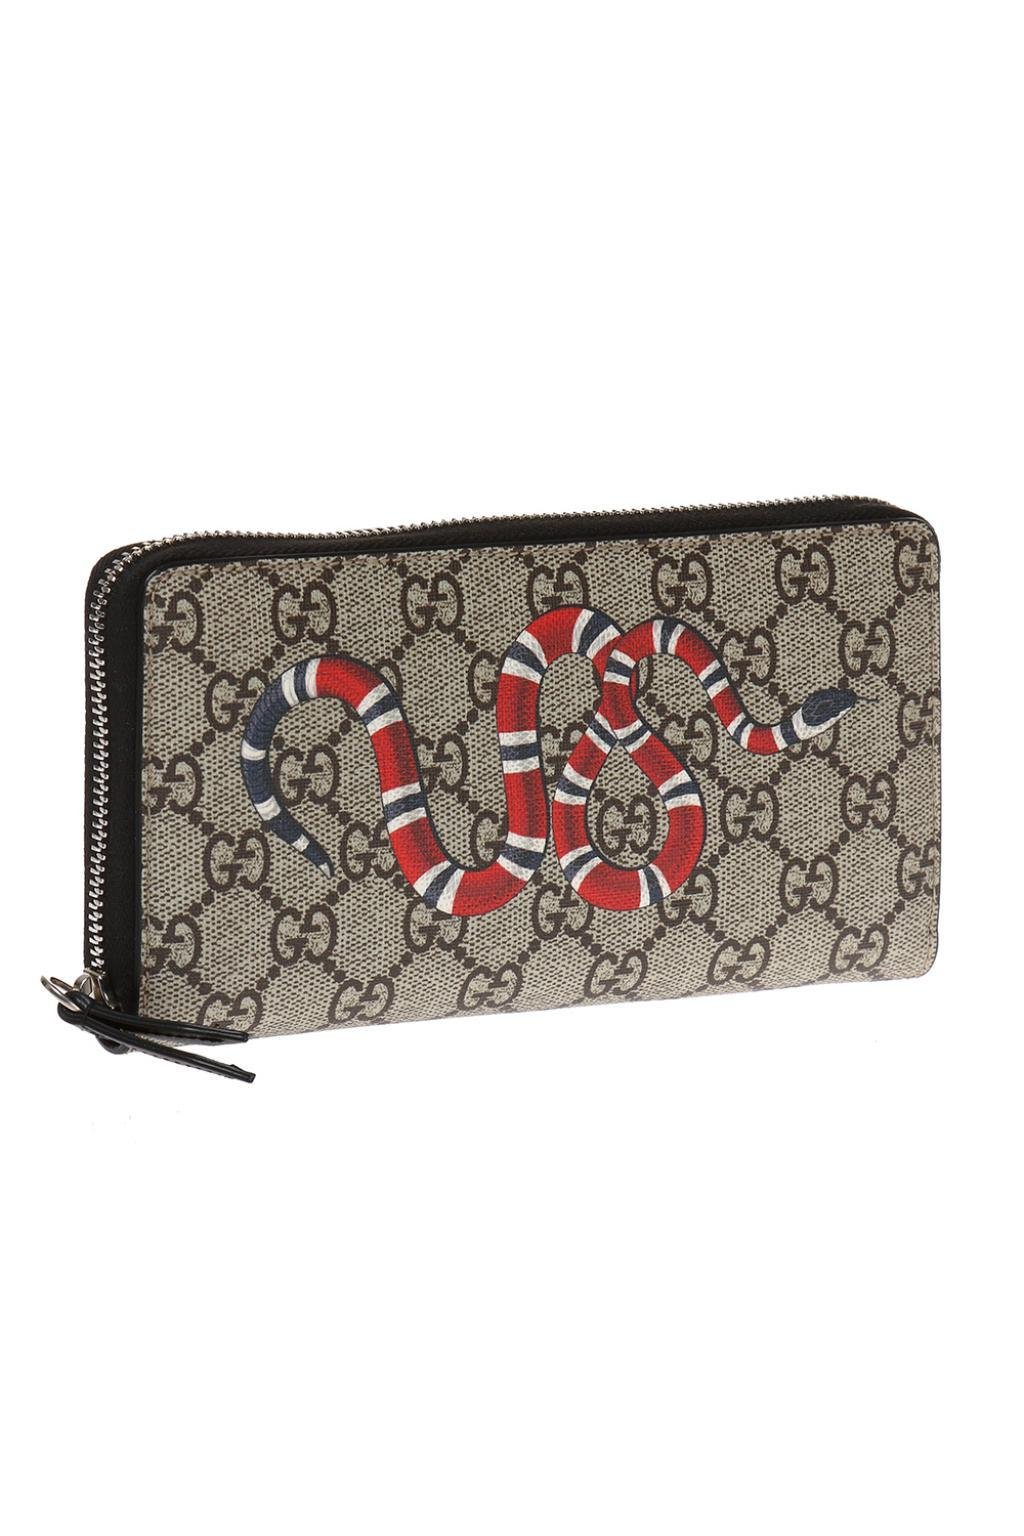 New Gucci Unisex Black Supreme GG Zip Wallet with Snake Print 575364 1058